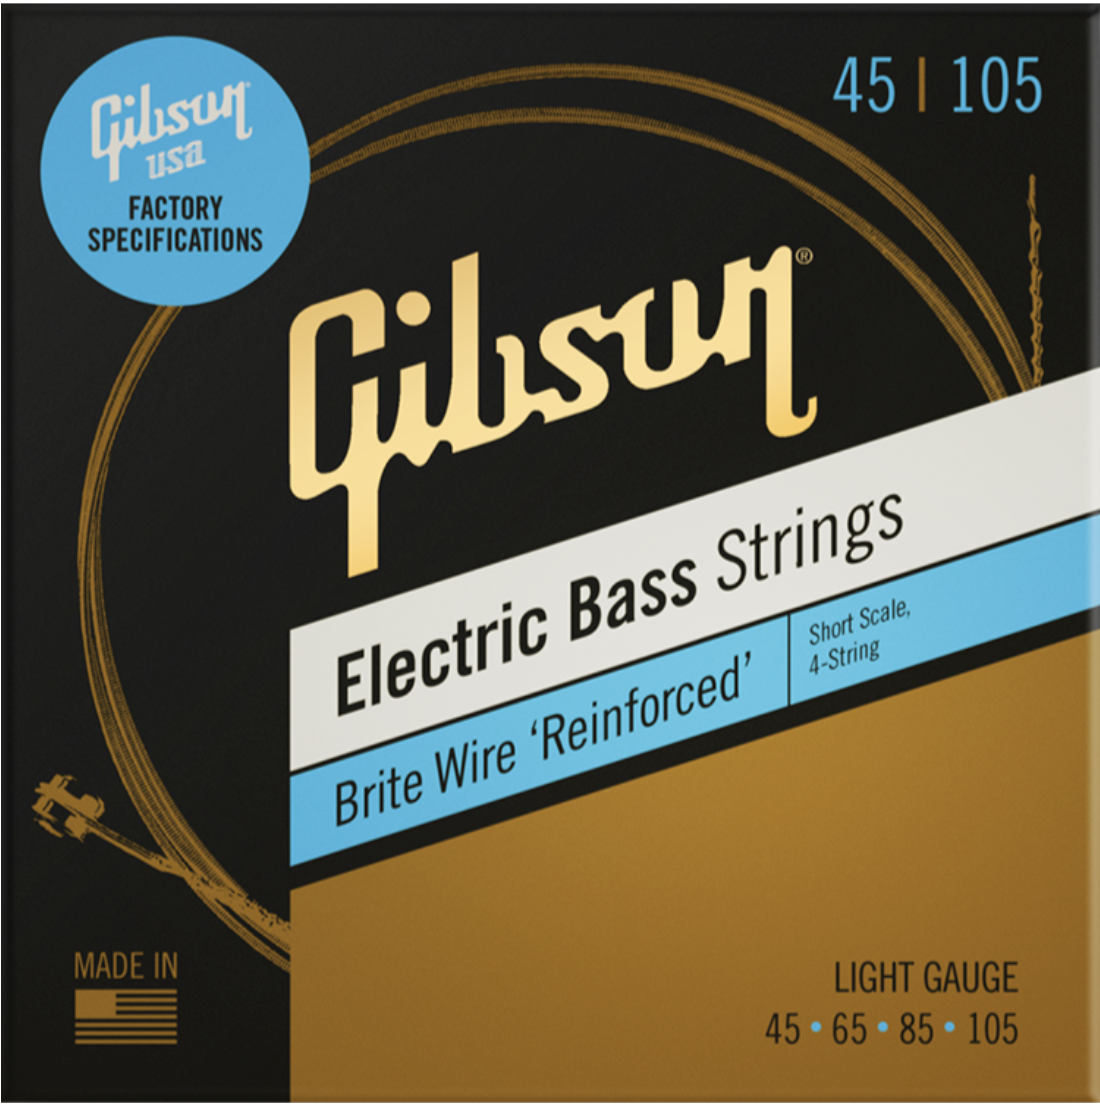 45-105 Short Scale Brite Wire Electric Bass Strings, 4-String, Roundwound Light